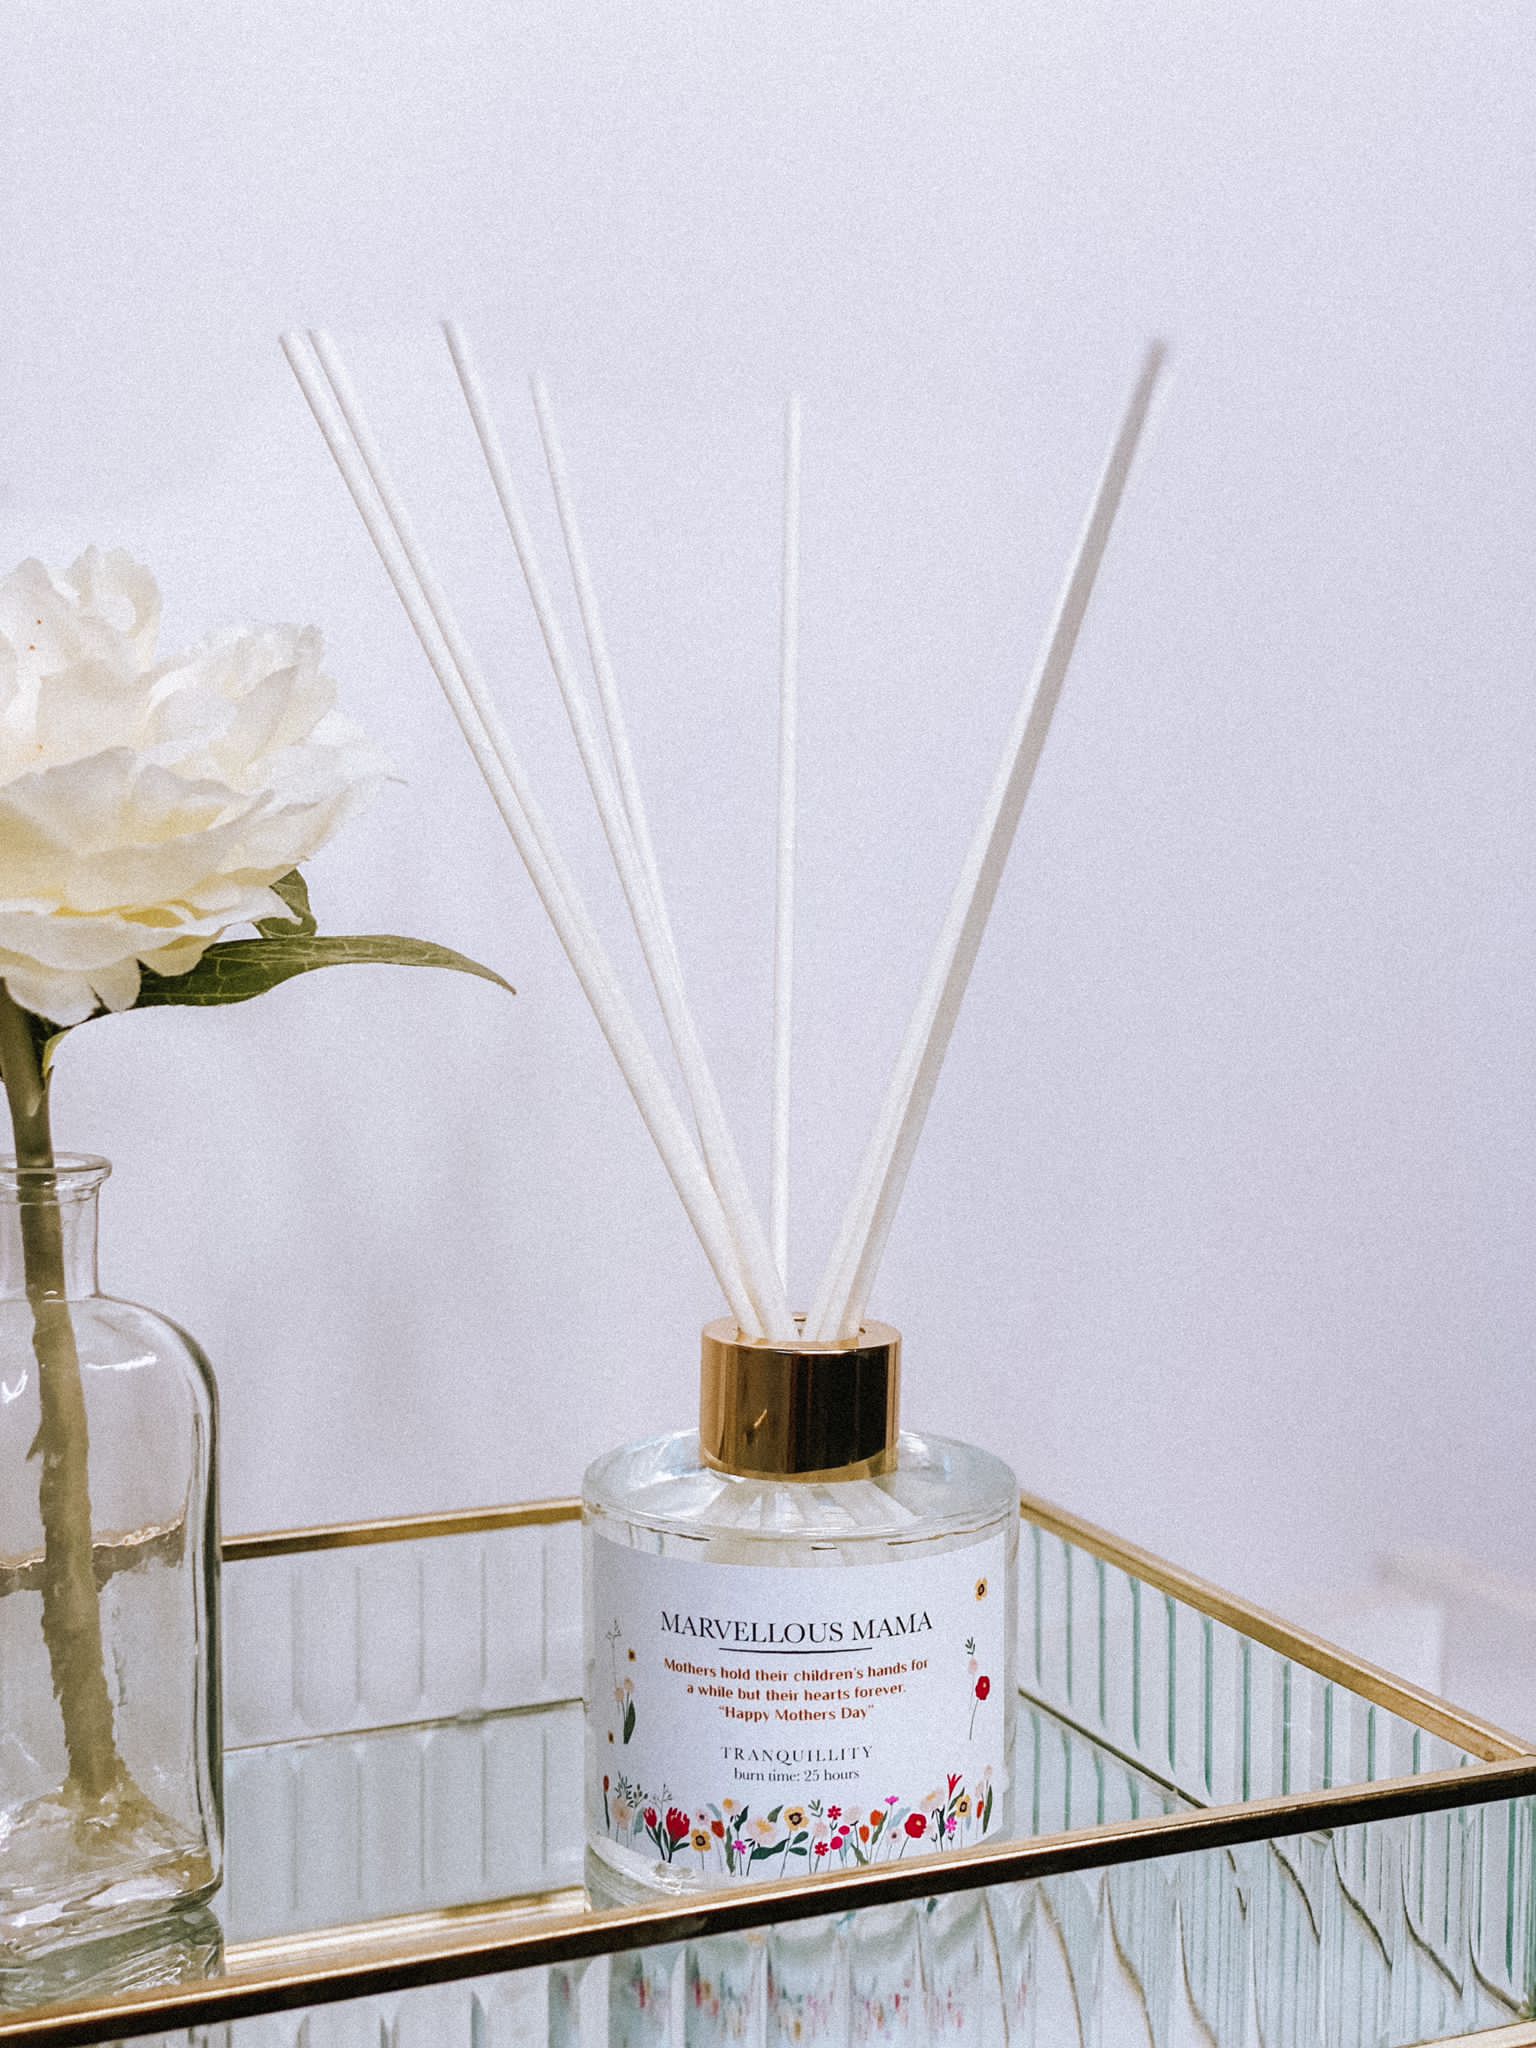 "Marvellous Mama" Reed Diffuser